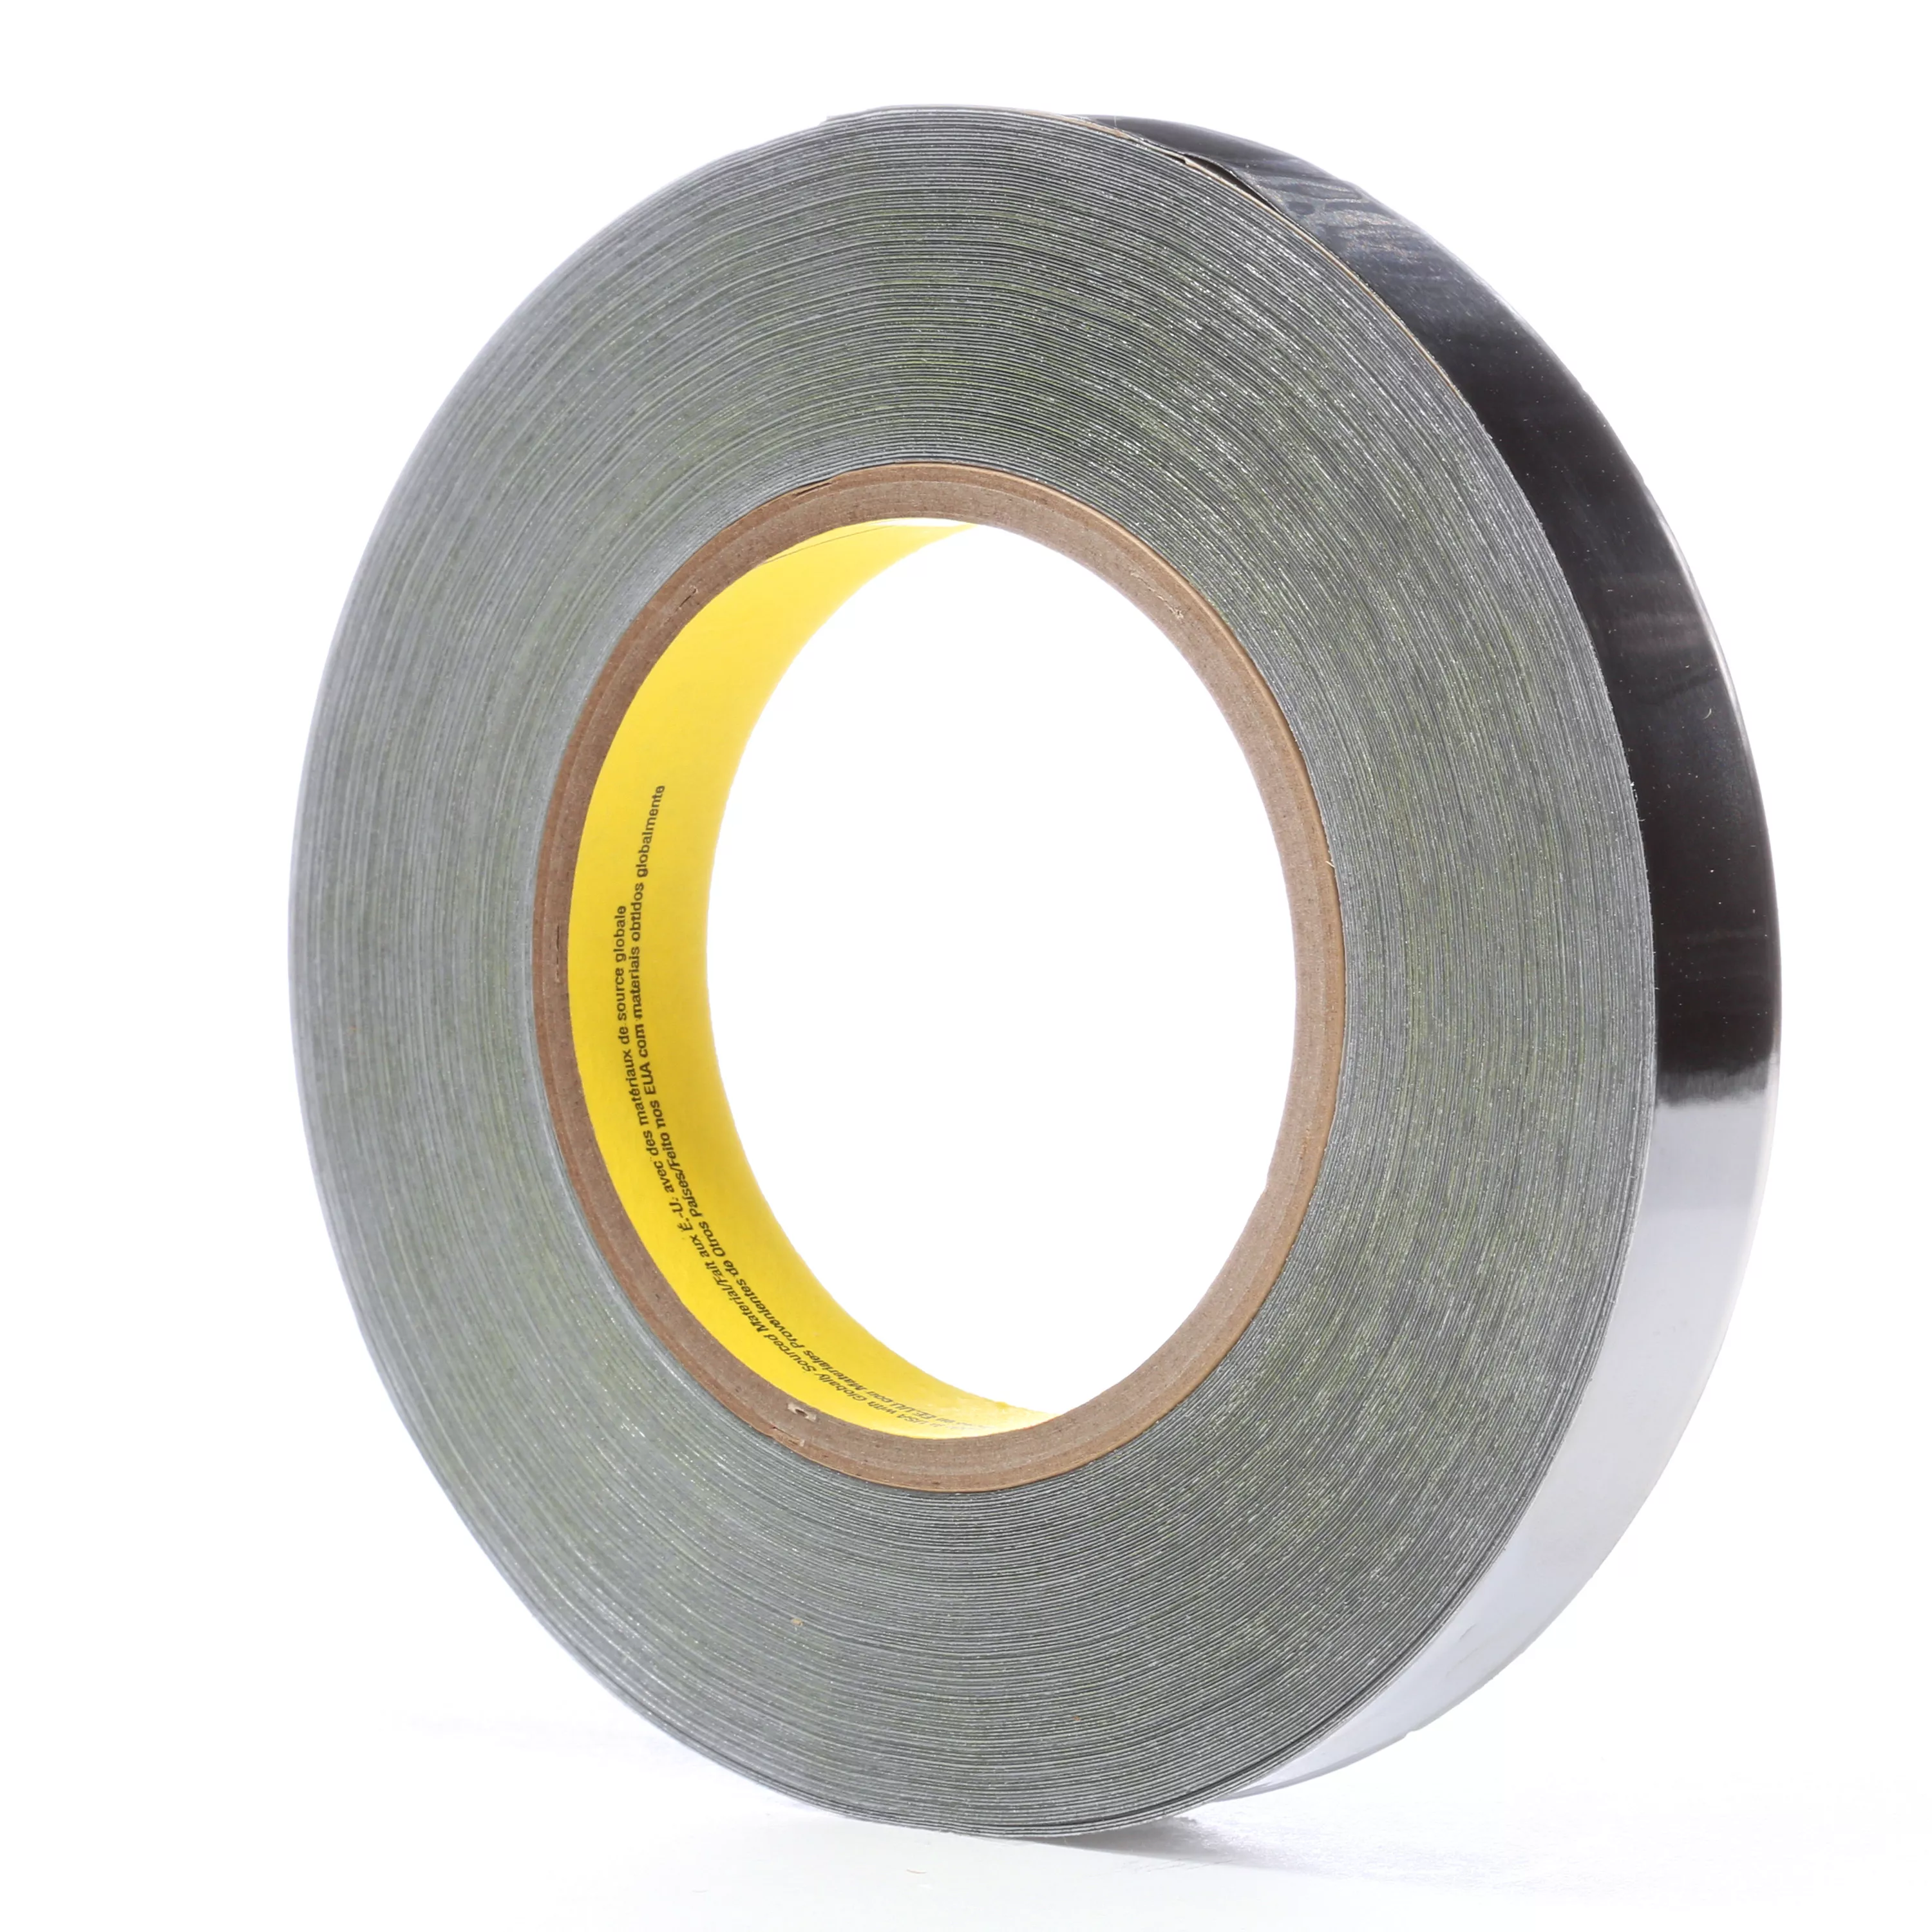 Product Number 420 | 3M™ Lead Foil Tape 420